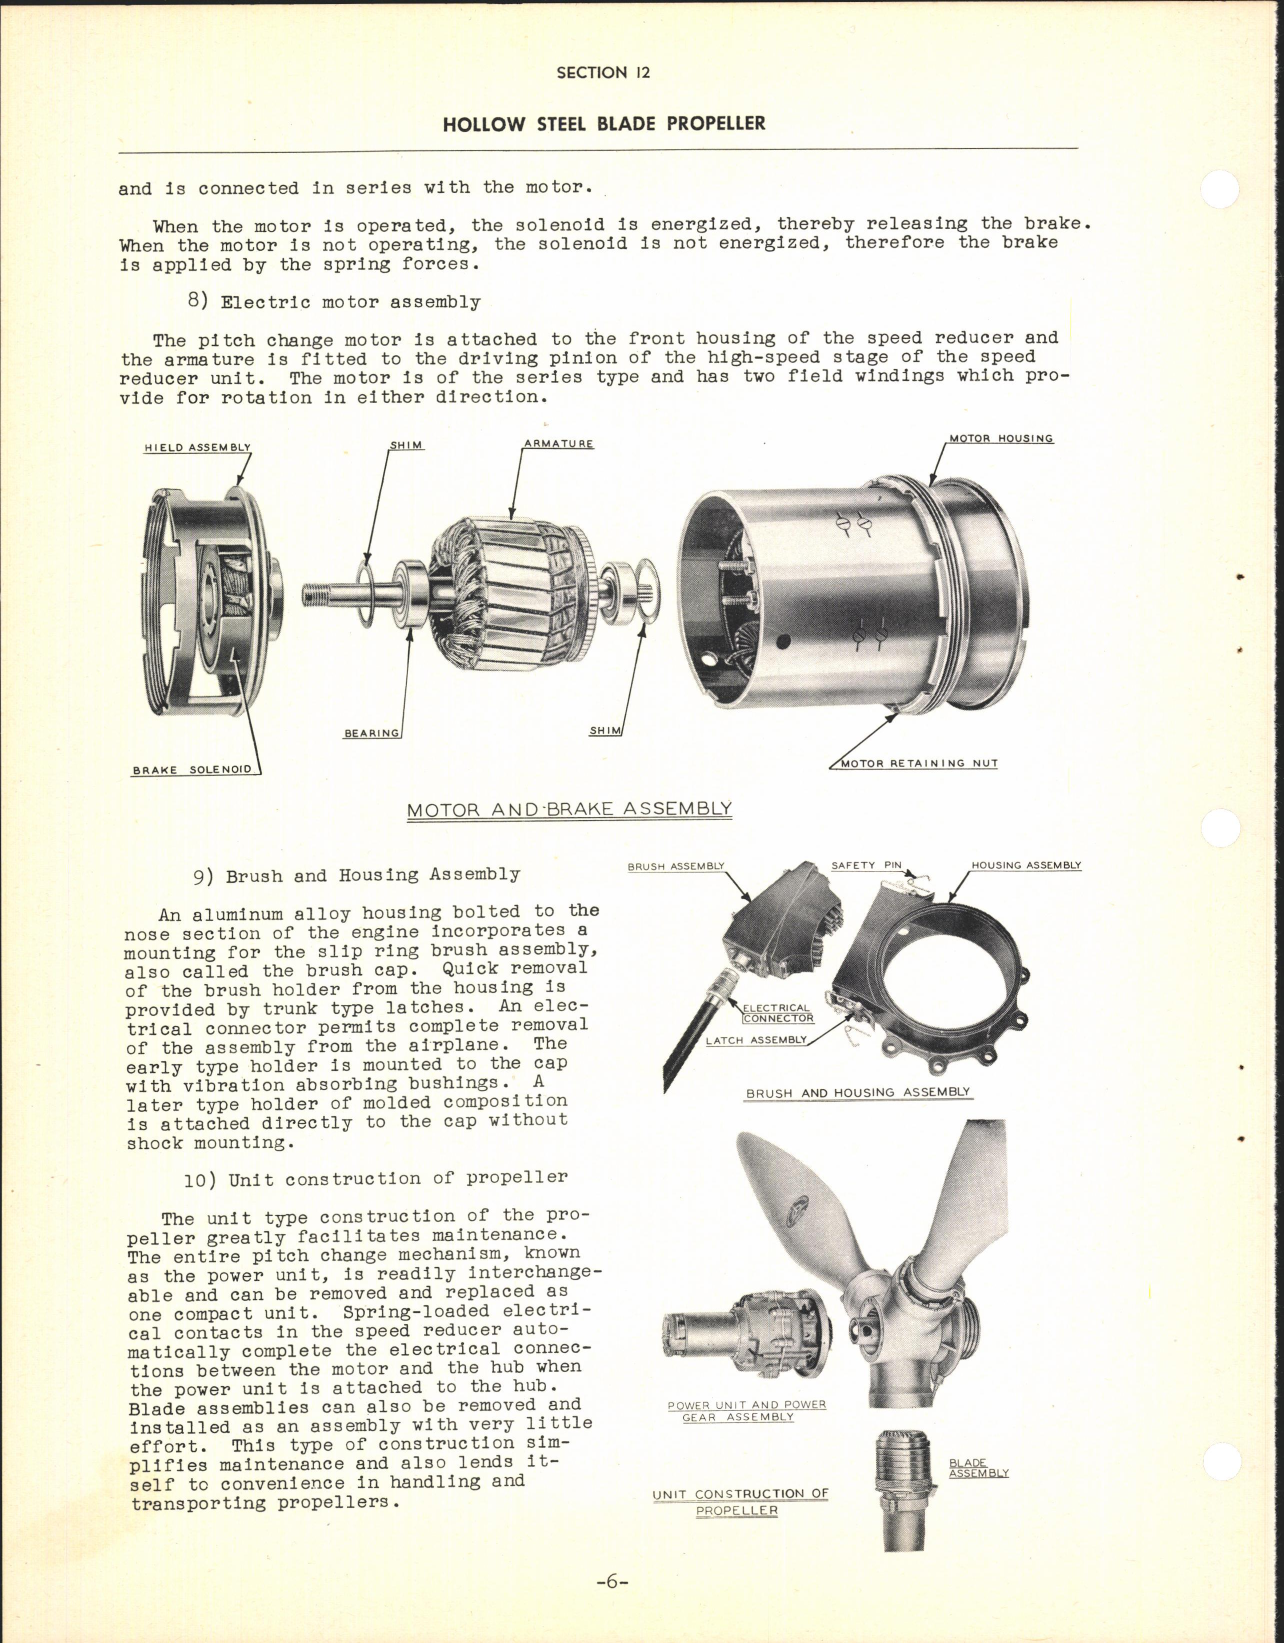 Sample page 8 from AirCorps Library document: Section 12 - Hollow Steel Blade Propeller (Three Blade)